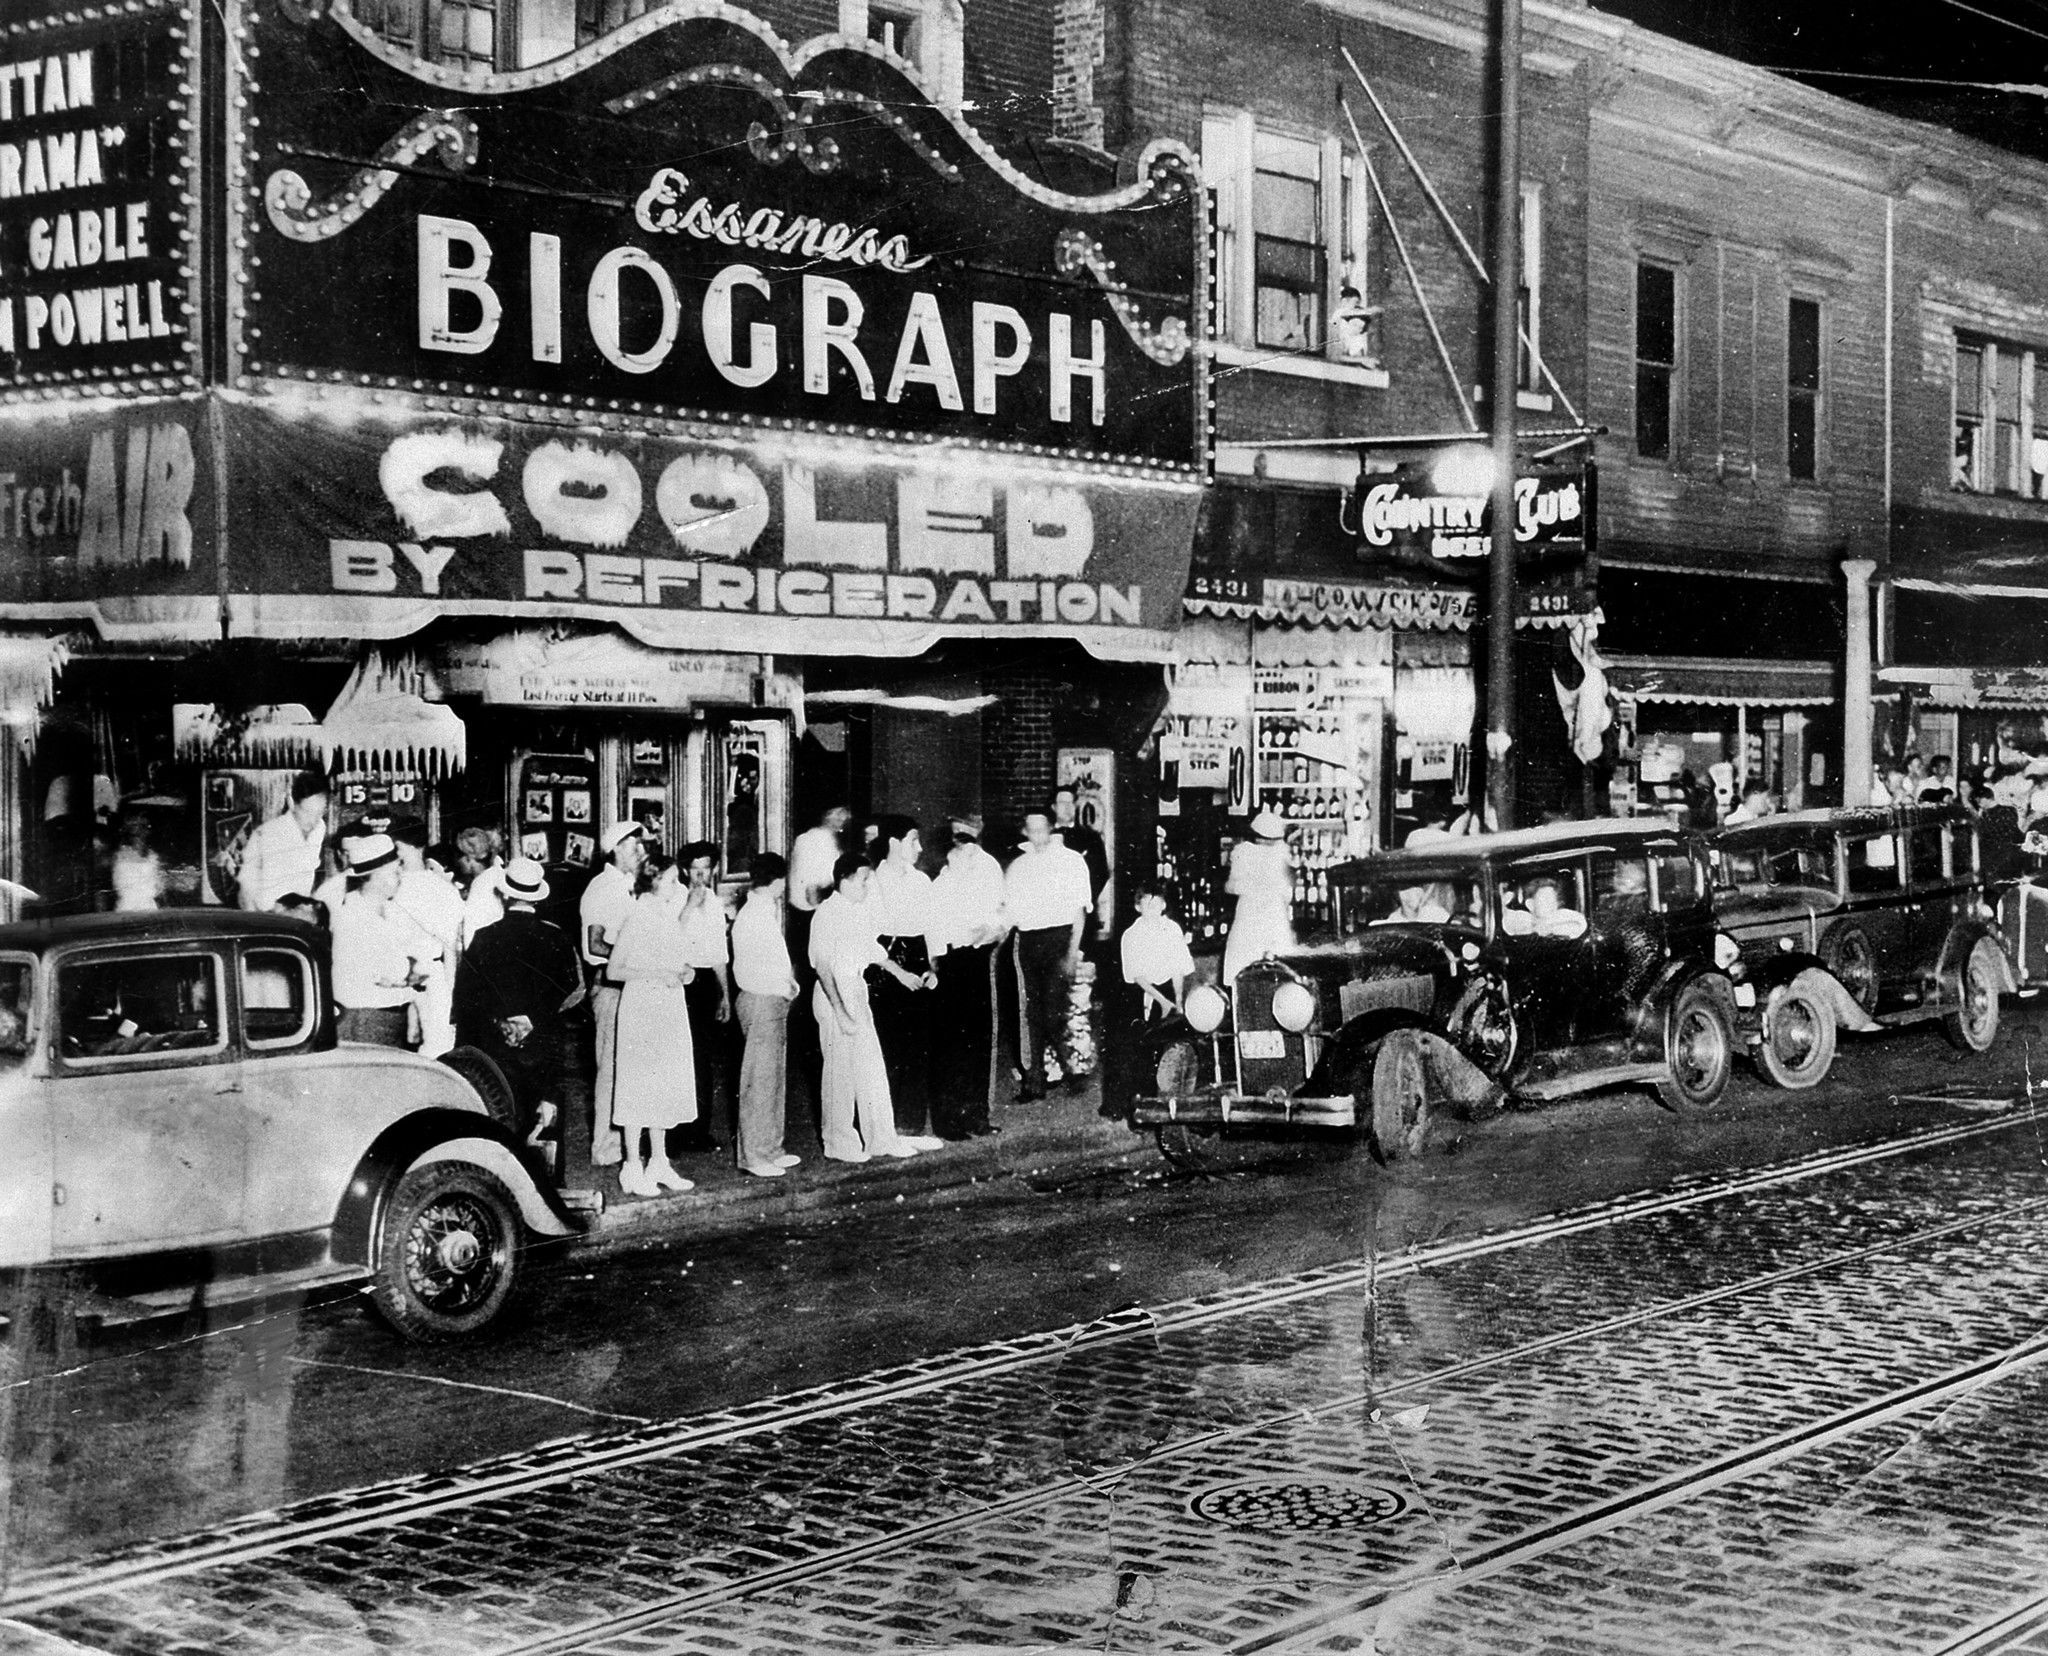 John Dillinger saw his last movie at the Biograph Theater 90 years ago